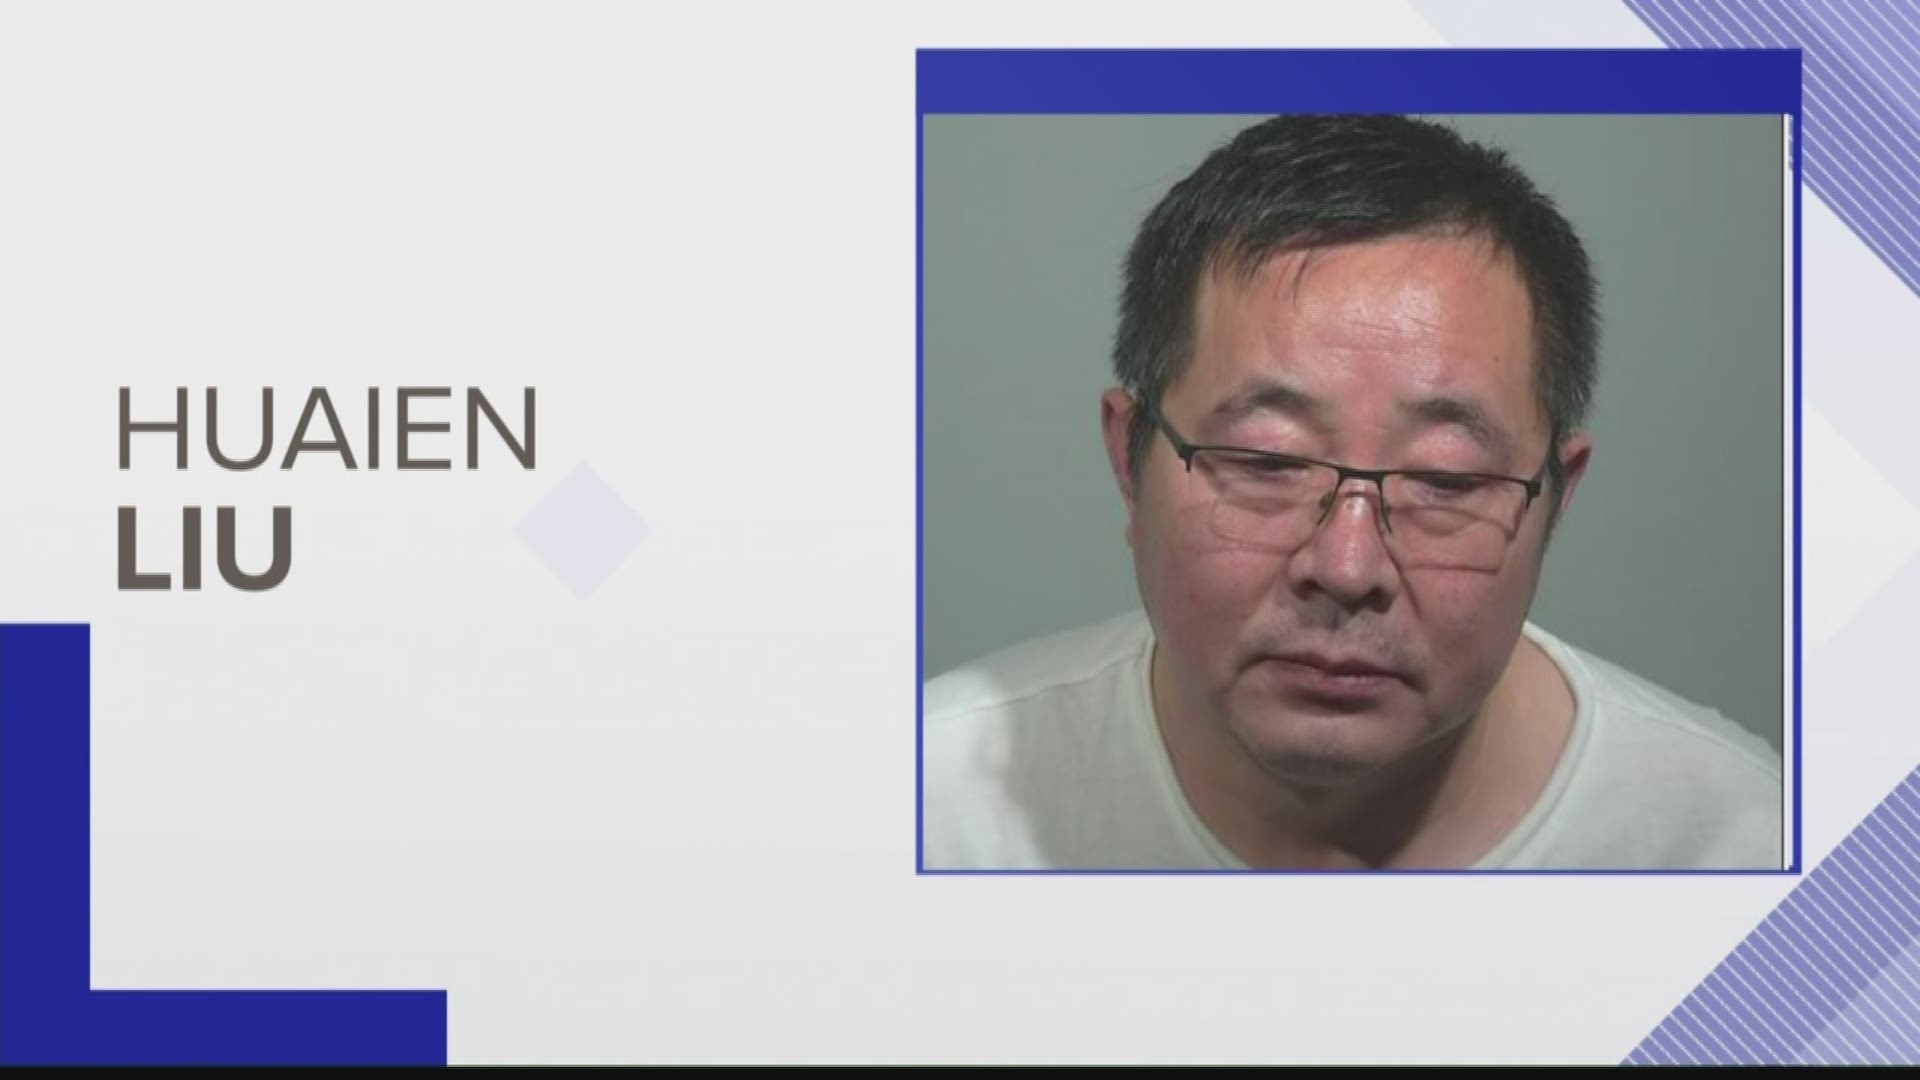 South Portland Police arrested 55-year-old HuaienLiu for charges of unlawful sexual touching, unlawful sexual contact, and assault.